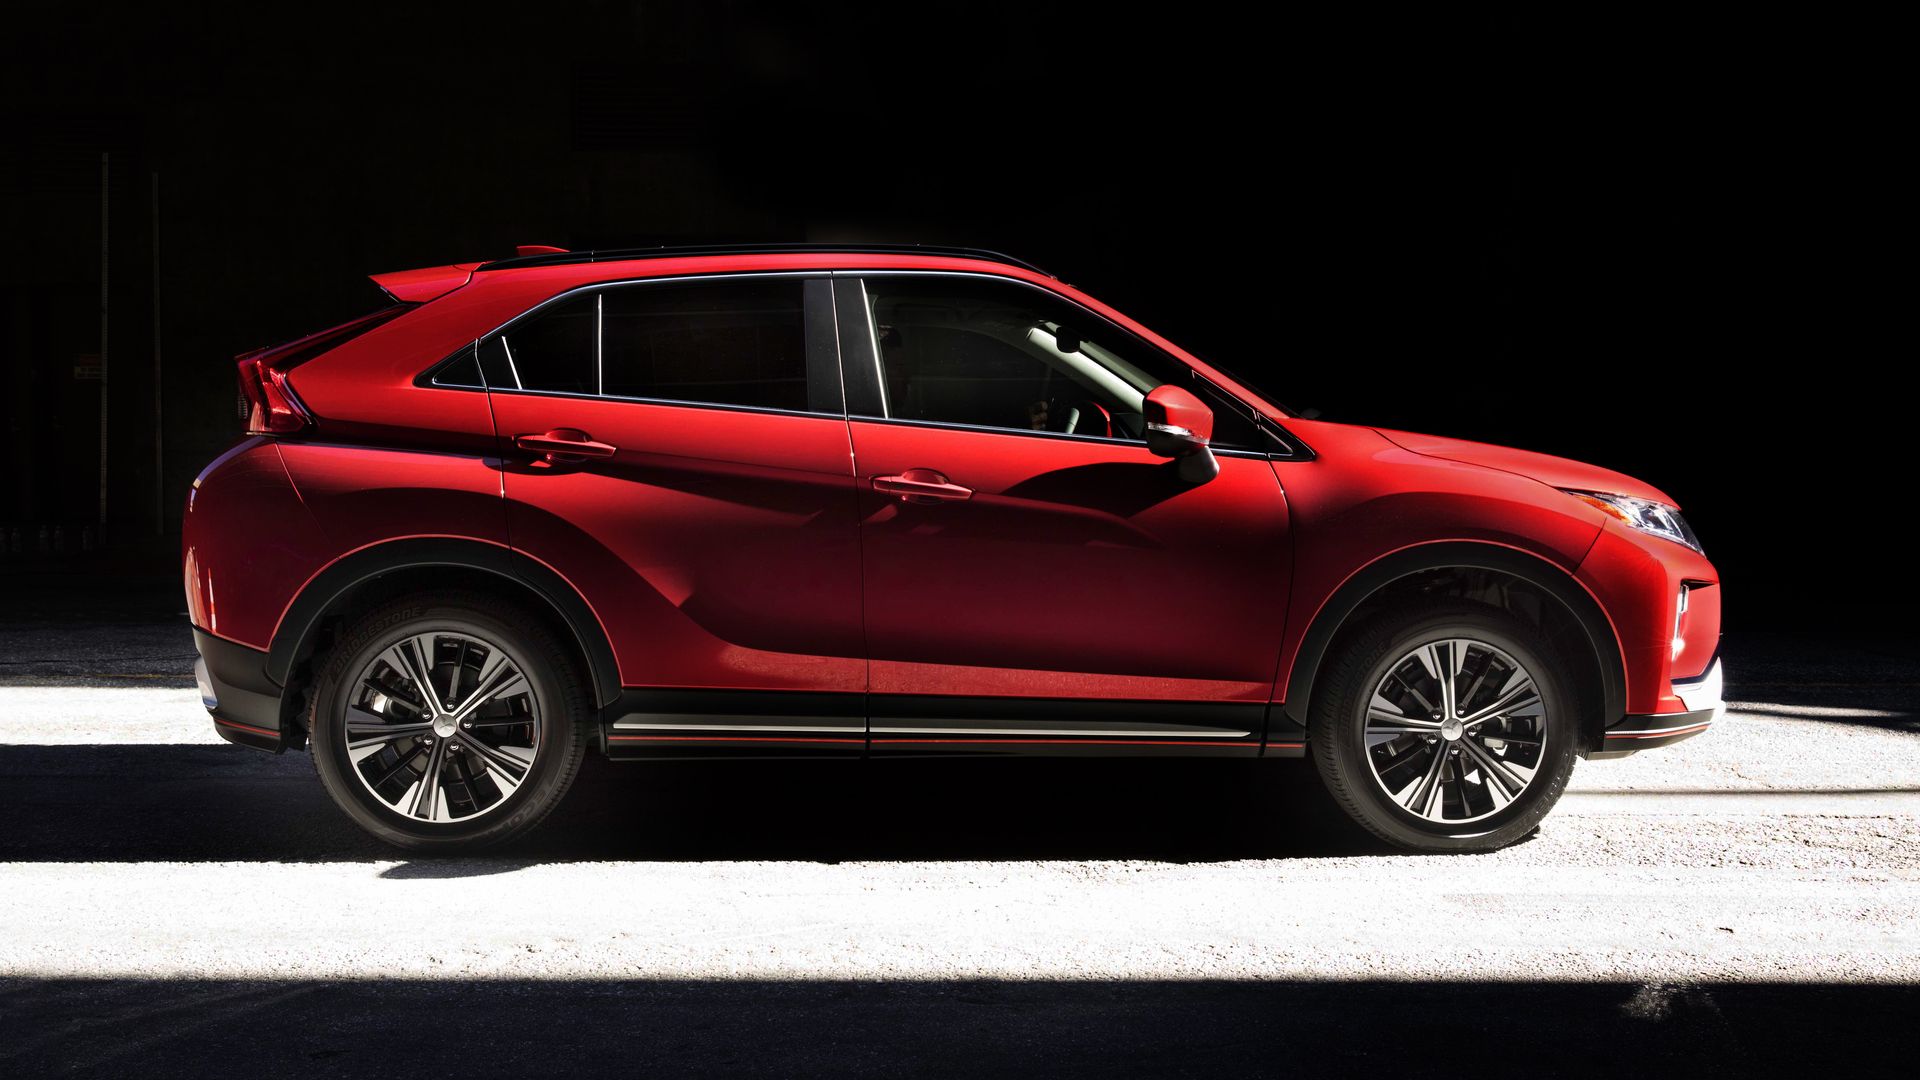 Image of red 2019 Mitsubishi Eclipse Cross compact SUV